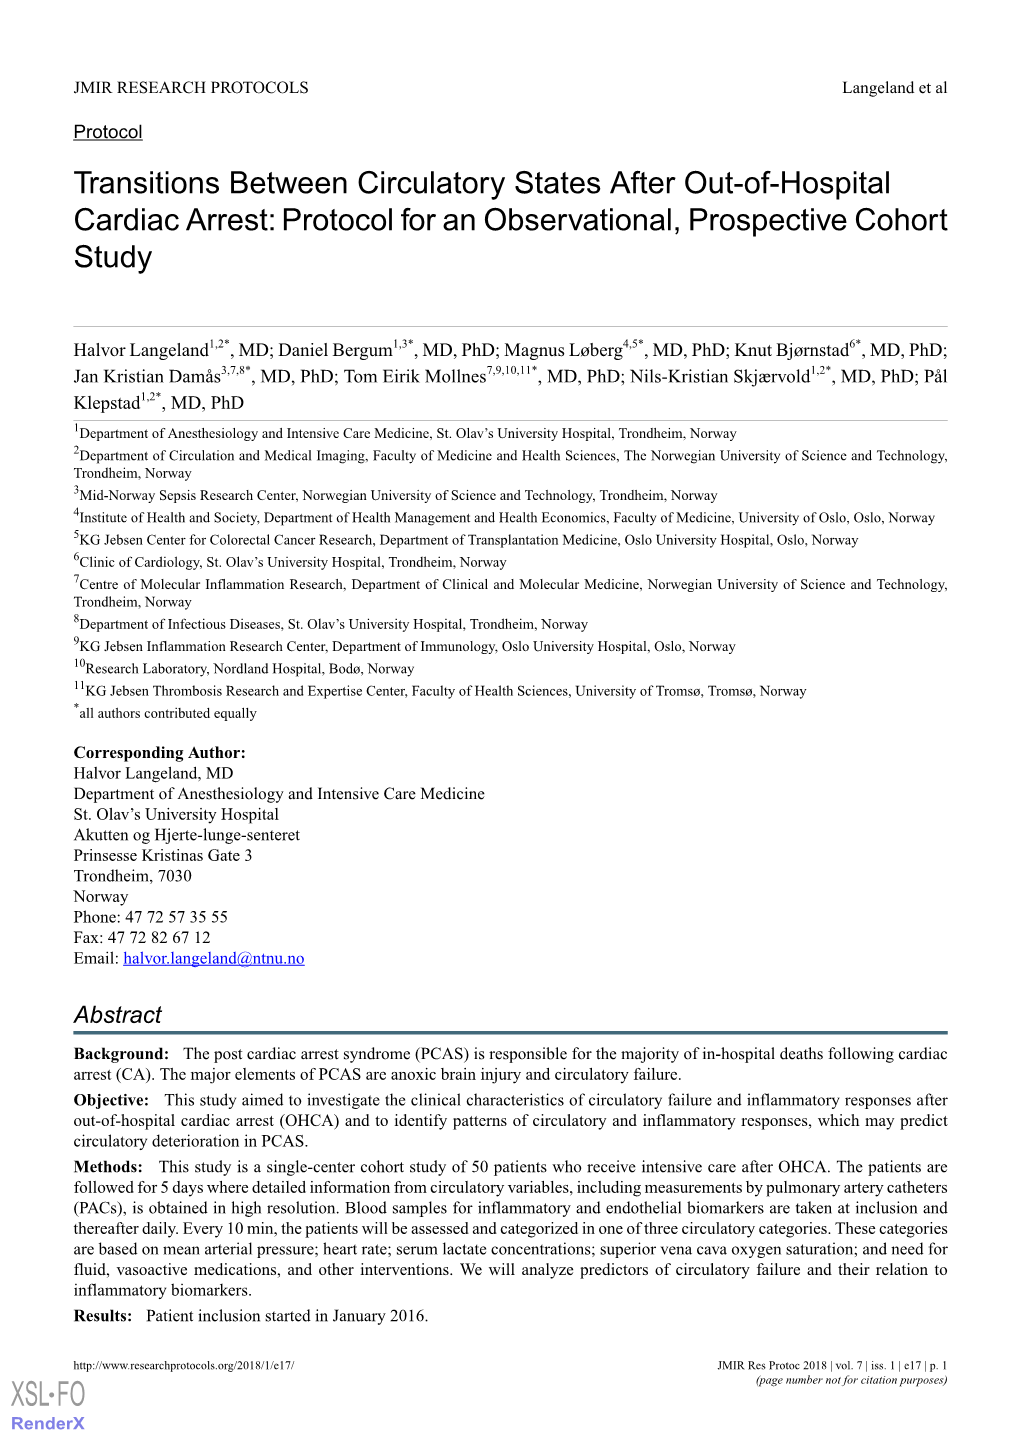 Transitions Between Circulatory States After Out-Of-Hospital Cardiac Arrest: Protocol for an Observational, Prospective Cohort Study